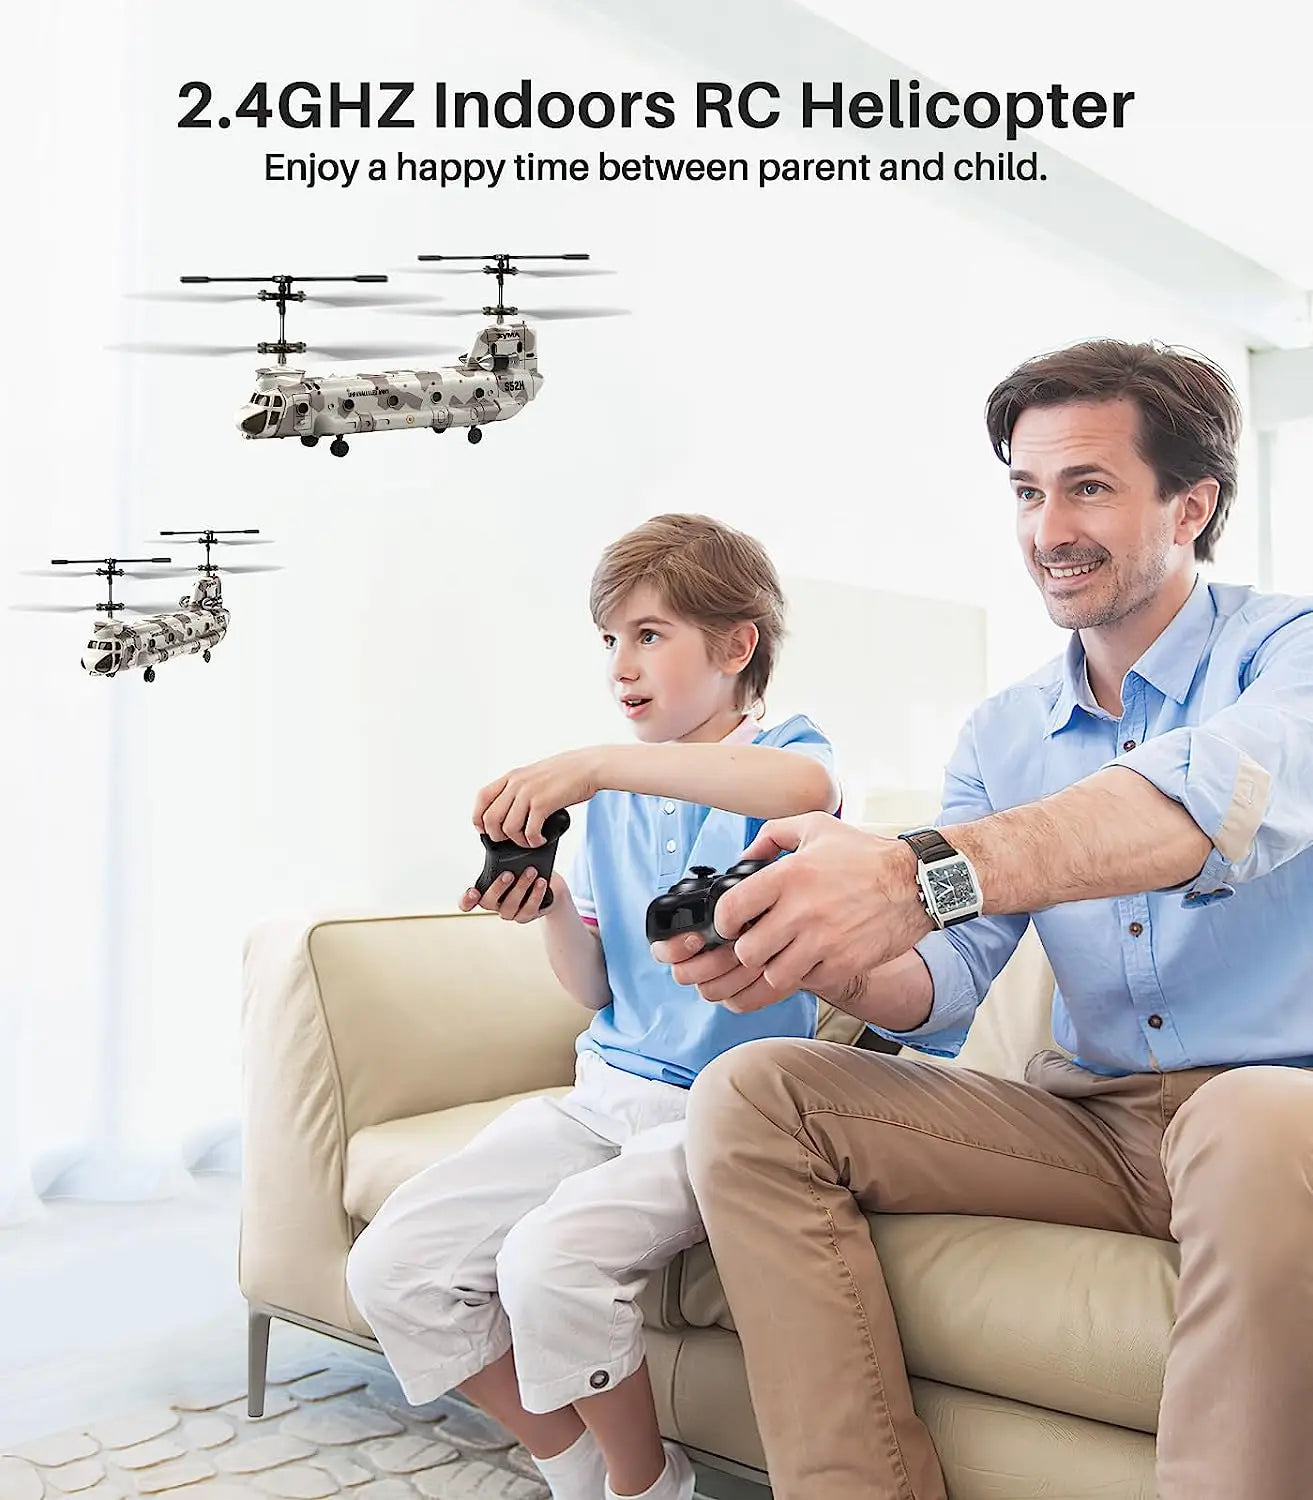 SYMA S52H Remote Control Helicopter, 2.4GHZ Indoors RC Helicopter Enjoy a happy time between parent and